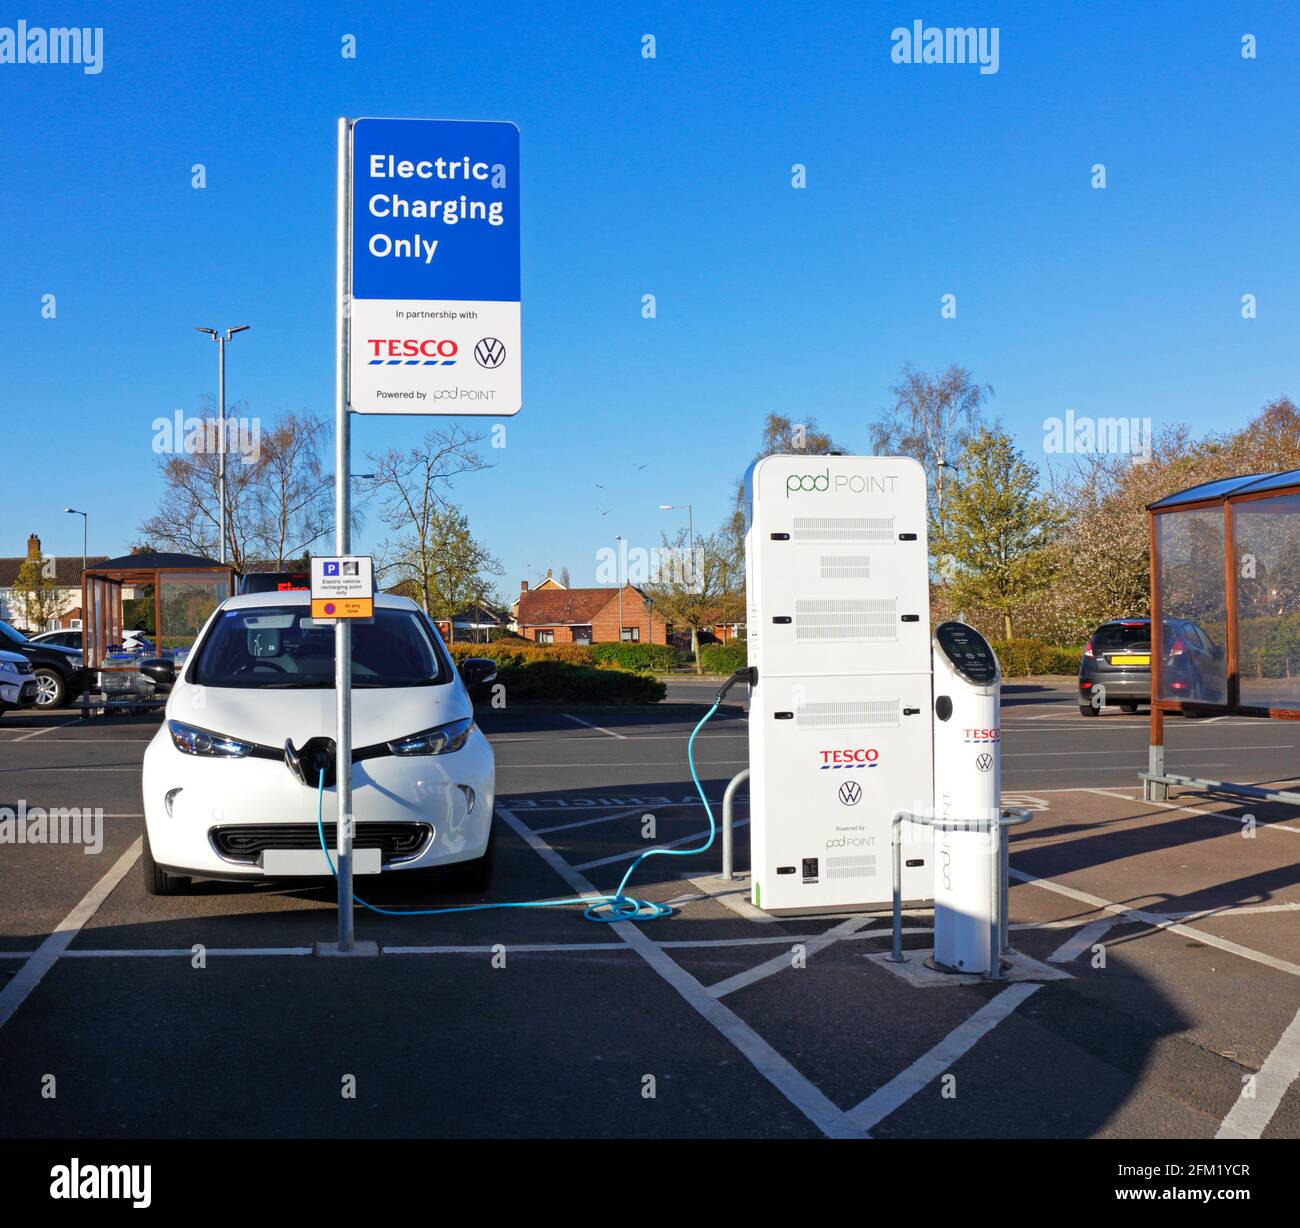 An electric car connected to a pod point recharging bay in a supermarket car park at Sprowston, Norfolk, England, United Kingdom. Stock Photo